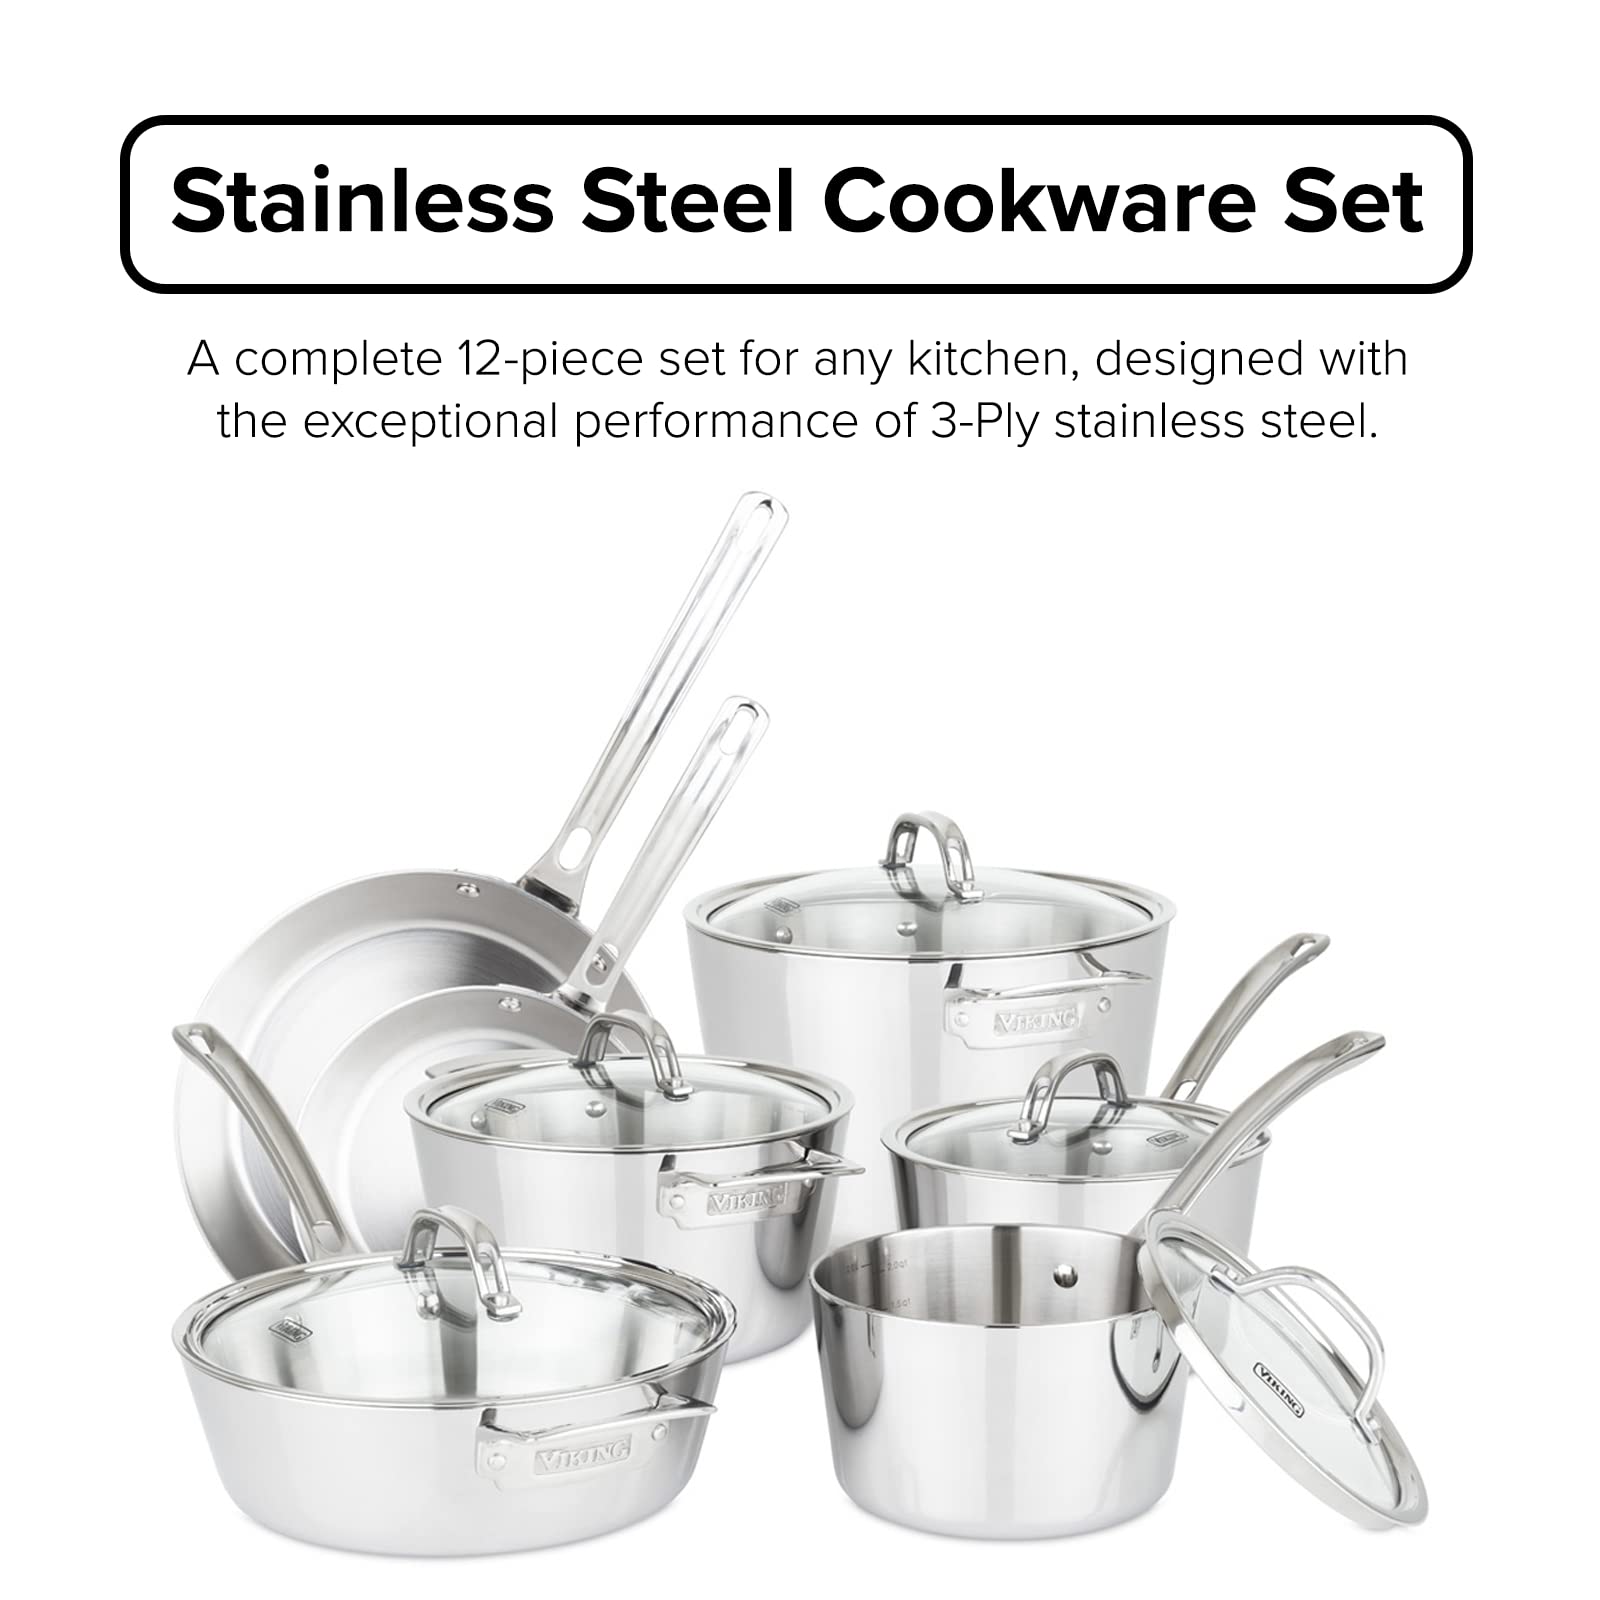 Viking Culinary Contemporary 3-Ply Stainless Steel Cookware Set with Glass Lids, 12 Piece | Dishwasher, Oven Safe | Works on All Cooktops including Induction